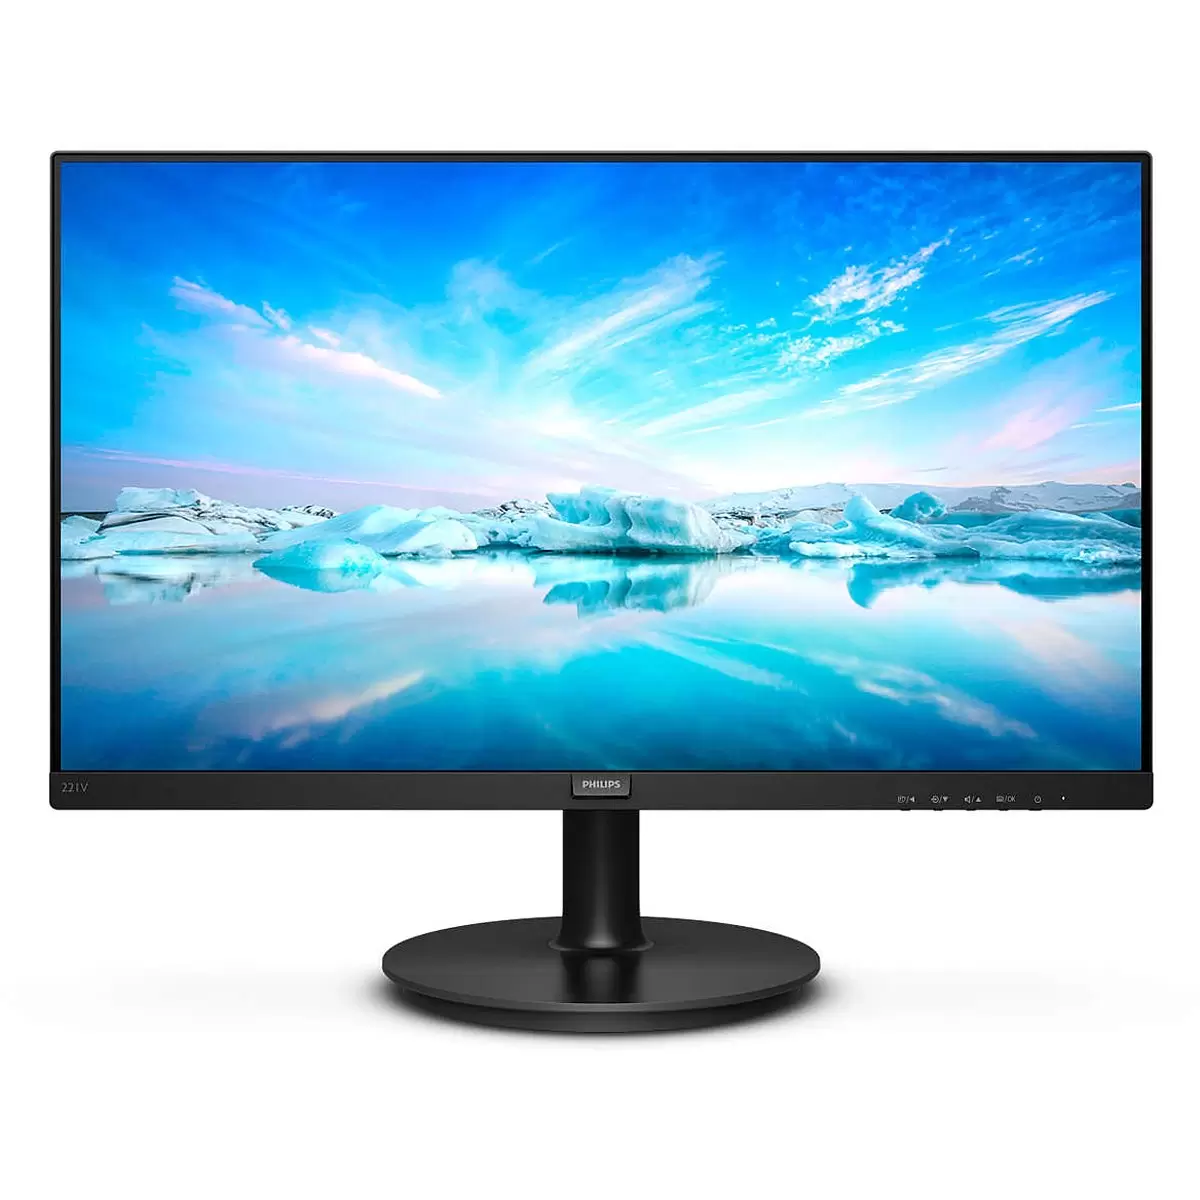 PHILIPS 221V8A 00 Monitor 21 5in FHD